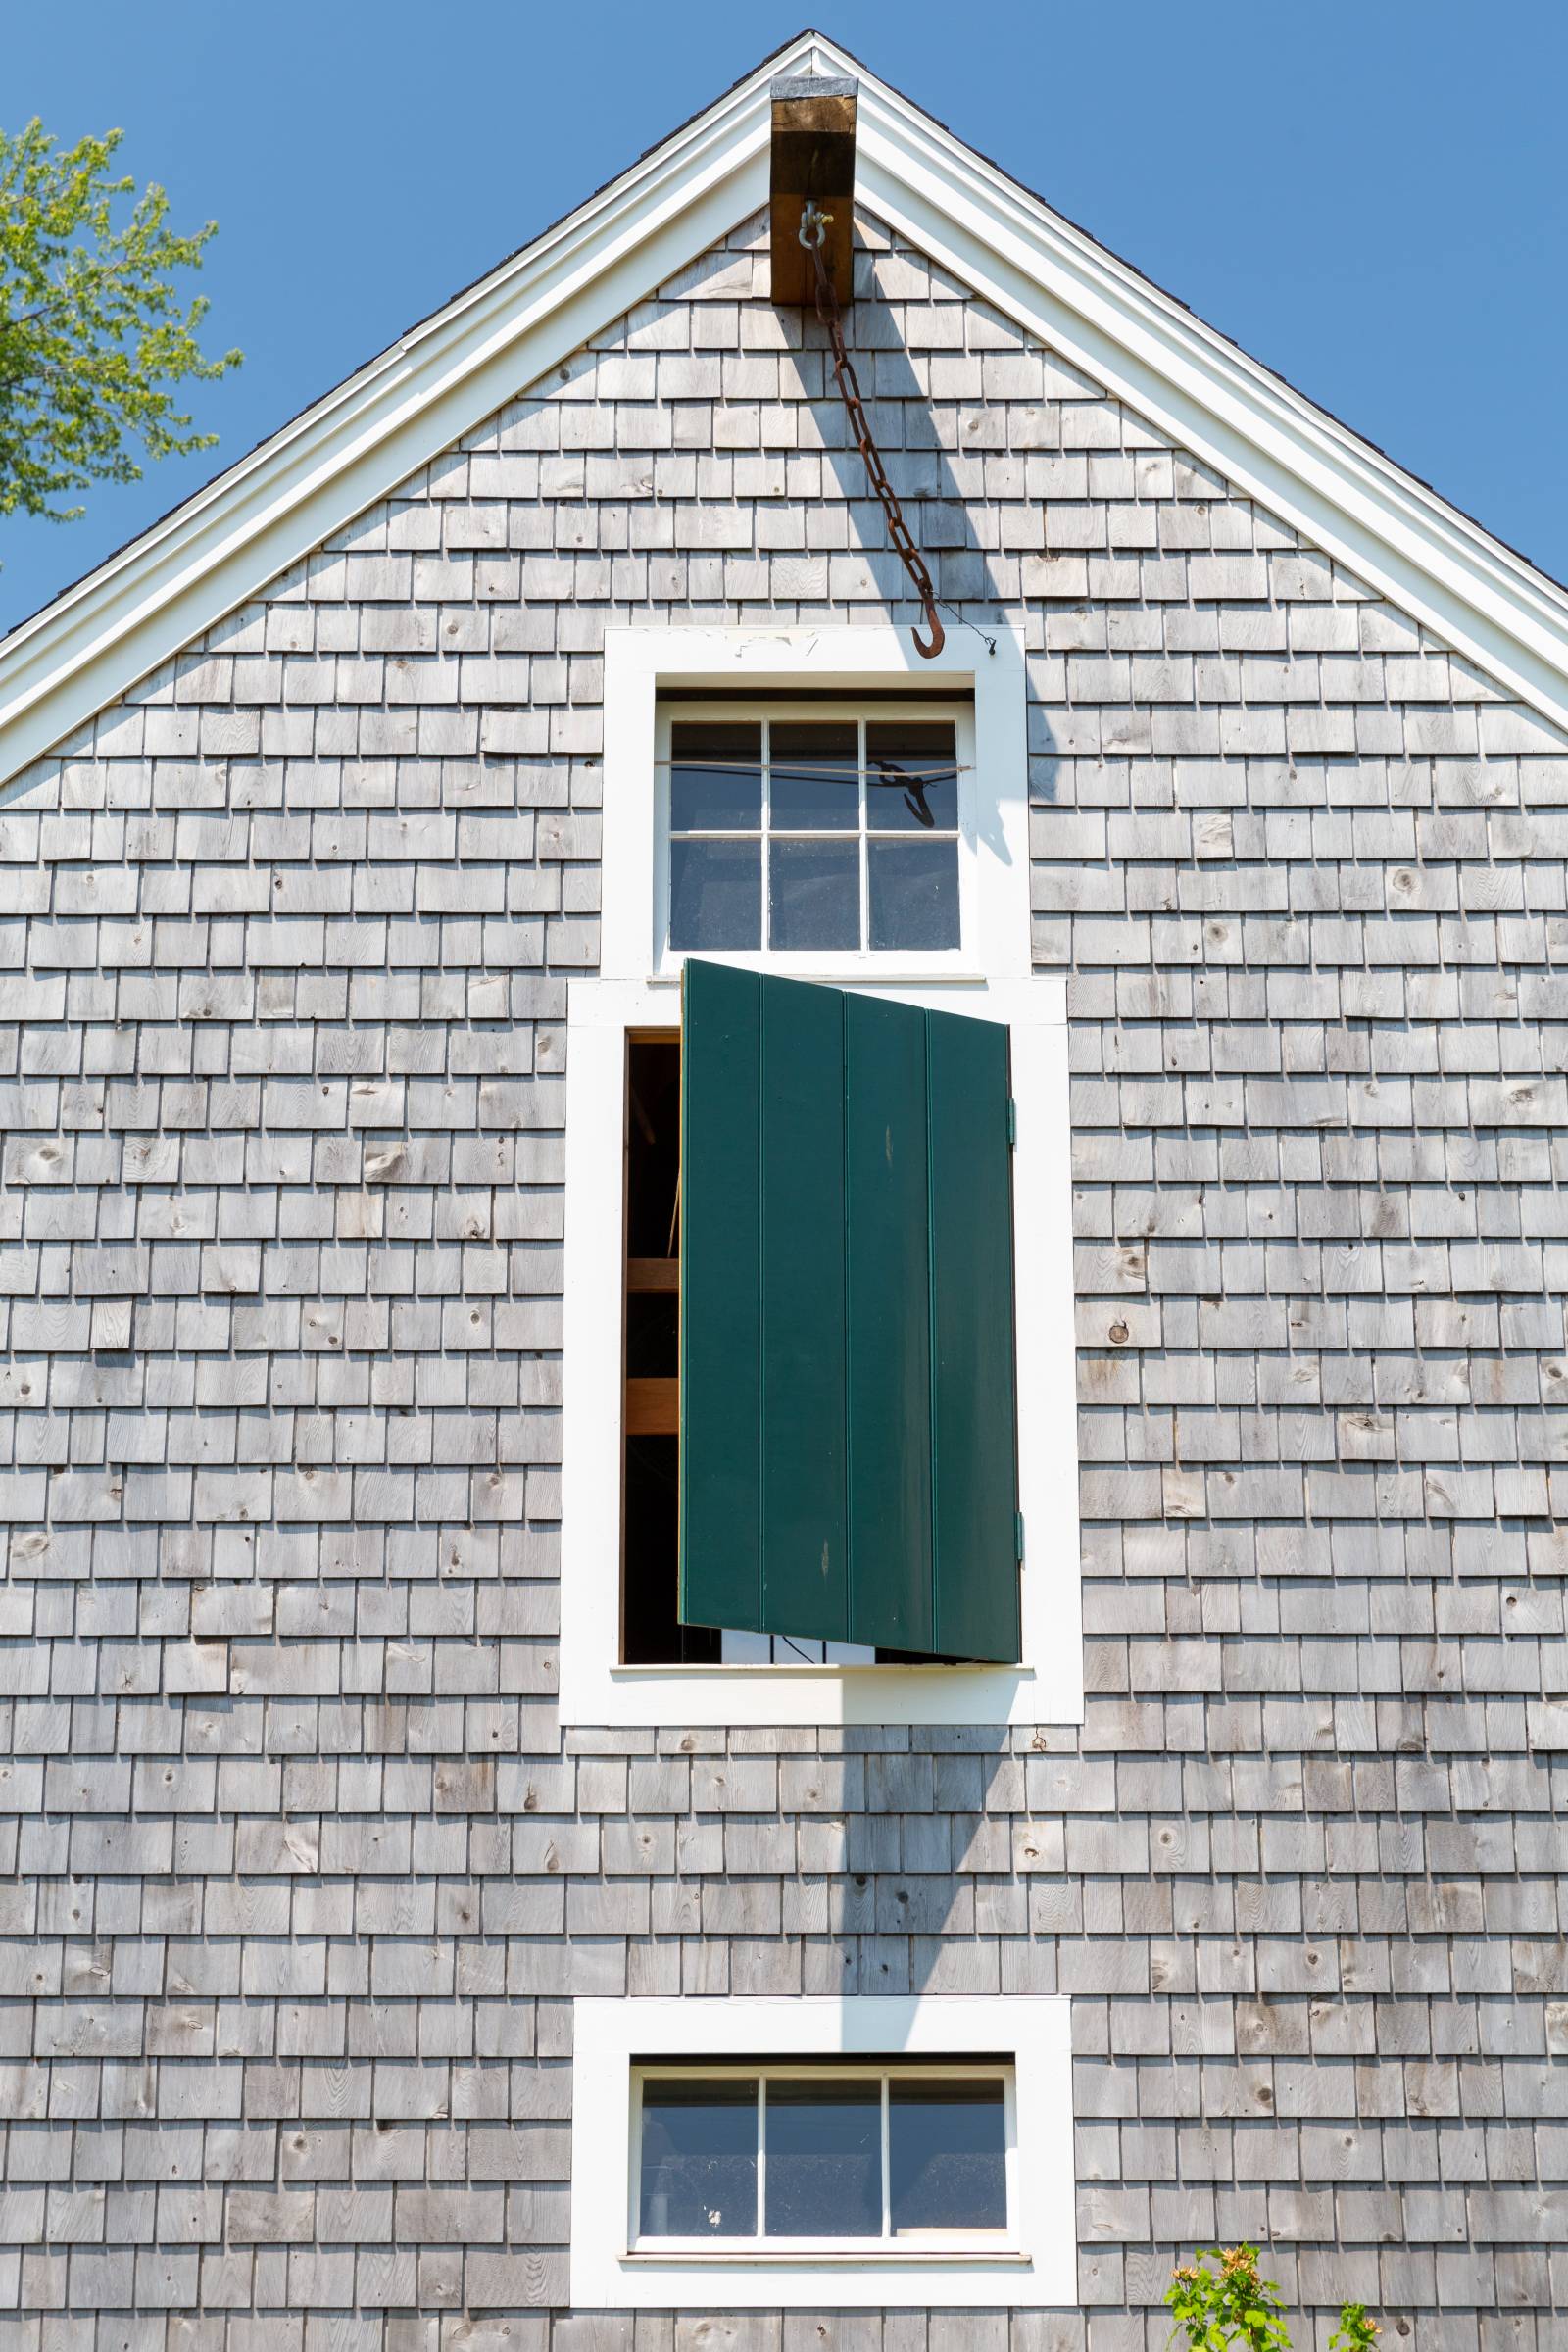 Hay Loft Style Door on Second Floor • 10-12 Roof Pitch • Cedar Shake Siding • Authentic Timber Frame Barn